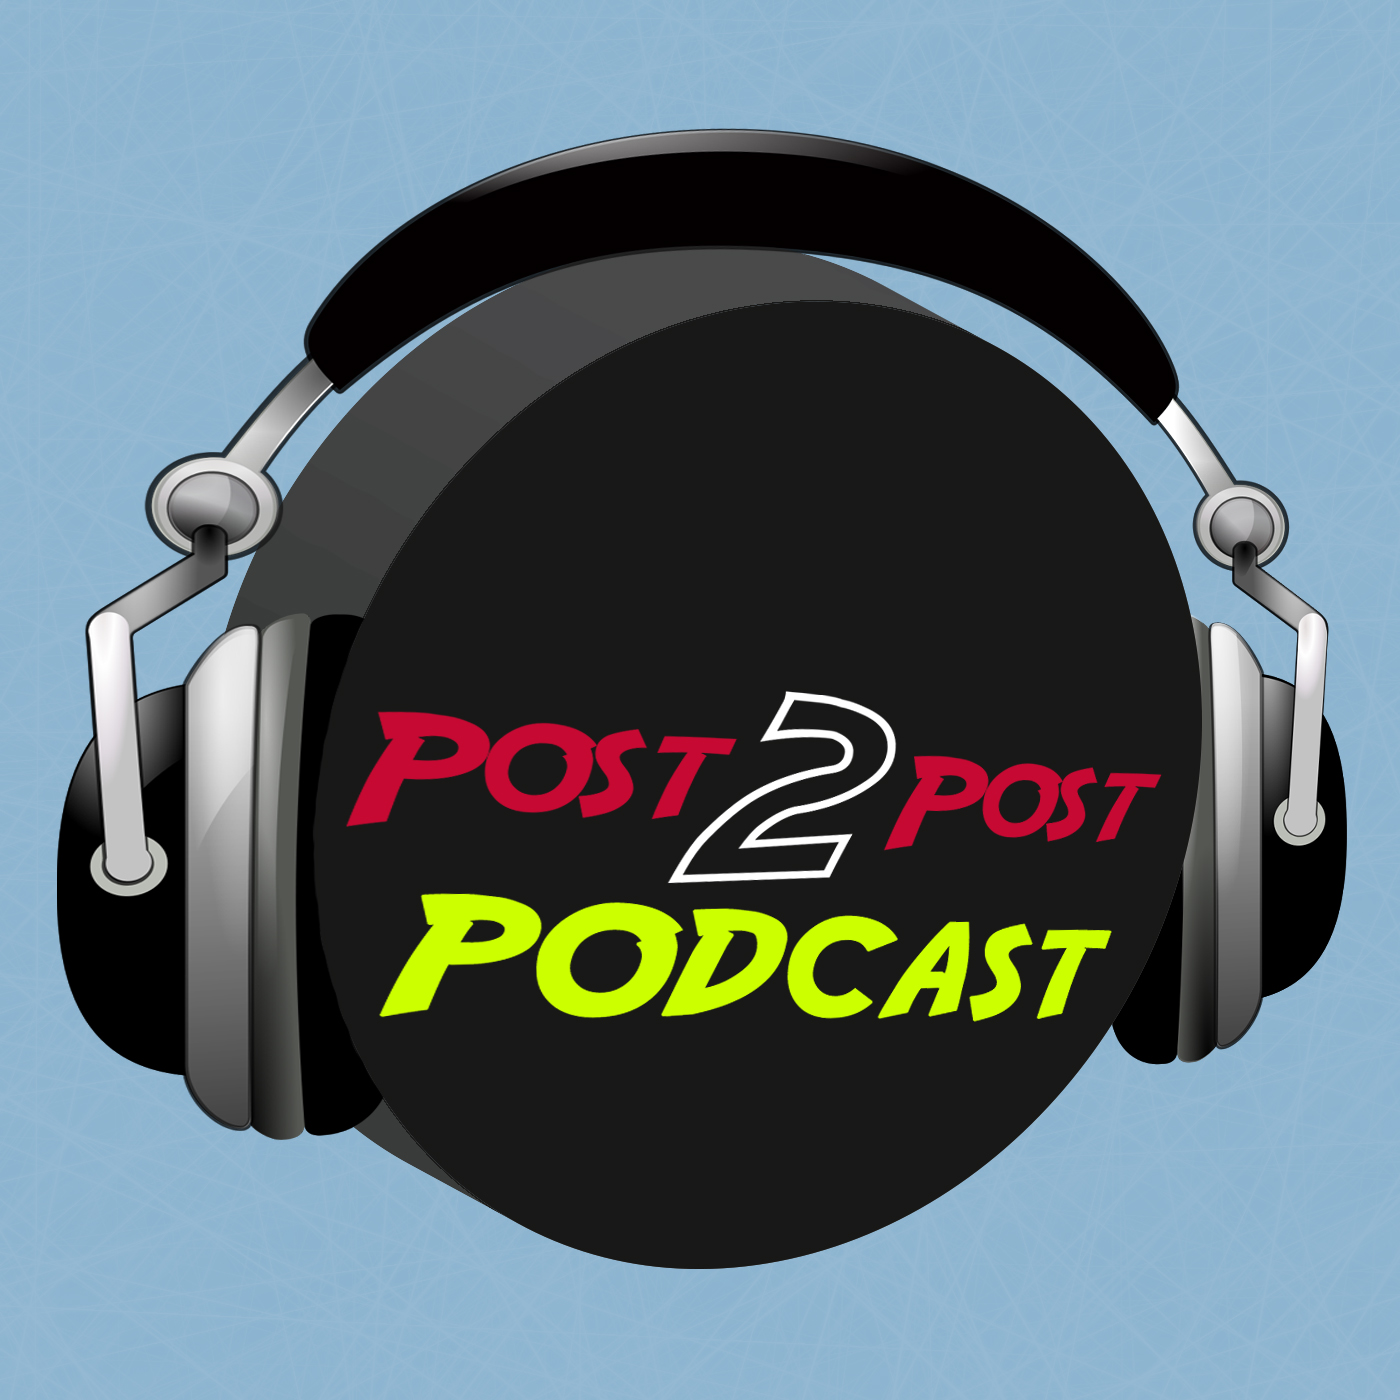 P2P Podcast: Ep #30 - Travel Plans, BOS, TOR, CHI, CAR, Contenders, Rumors, Future Videos + More!